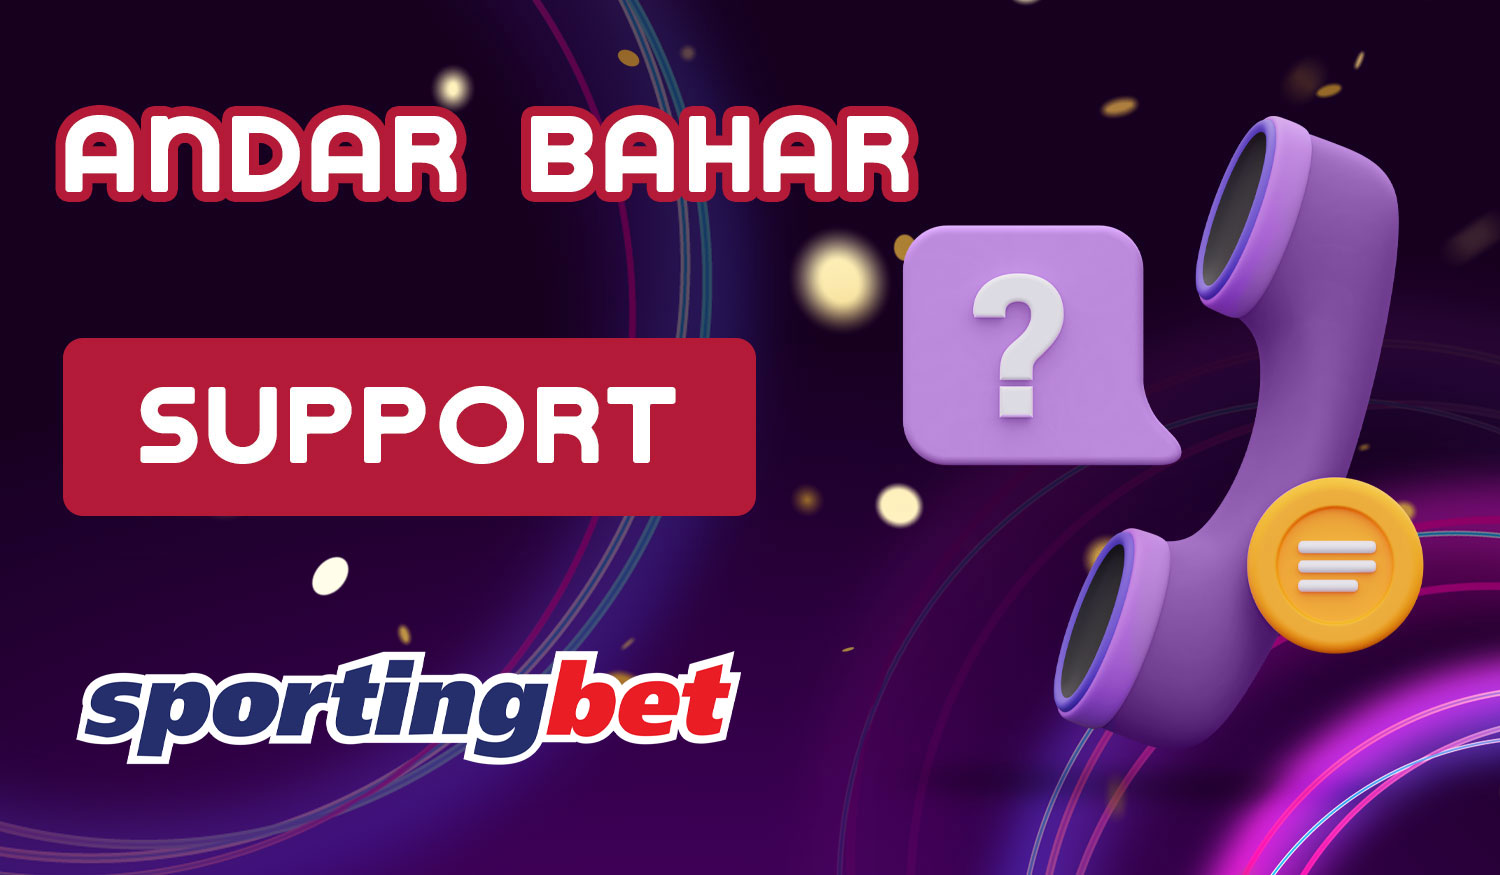 Sportingbet India provides round-the-clock full support for Andar Bahar players